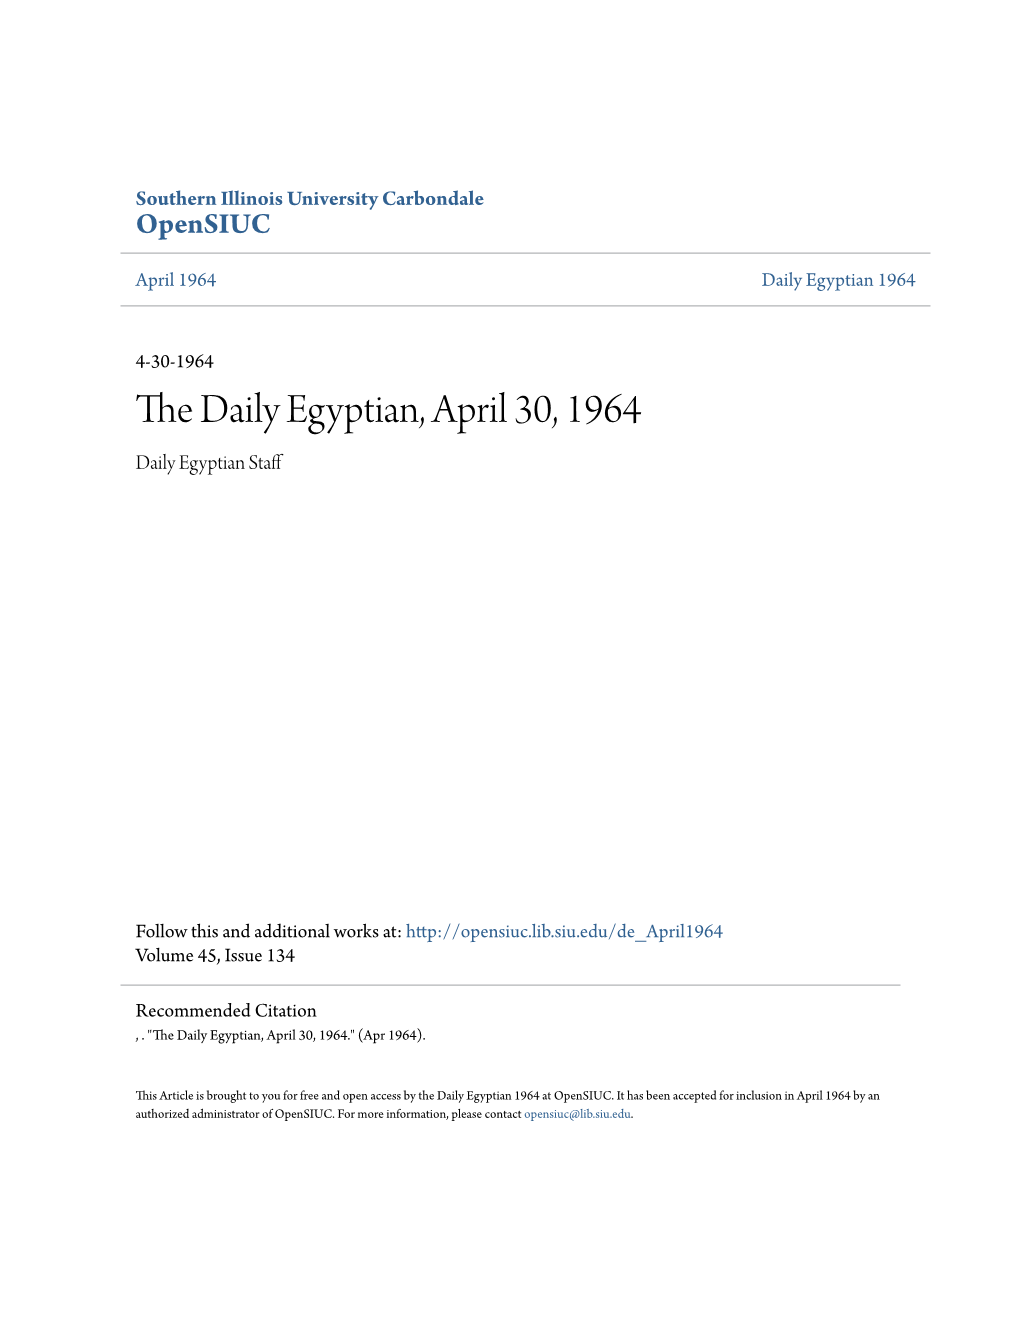 The Daily Egyptian, April 30, 1964